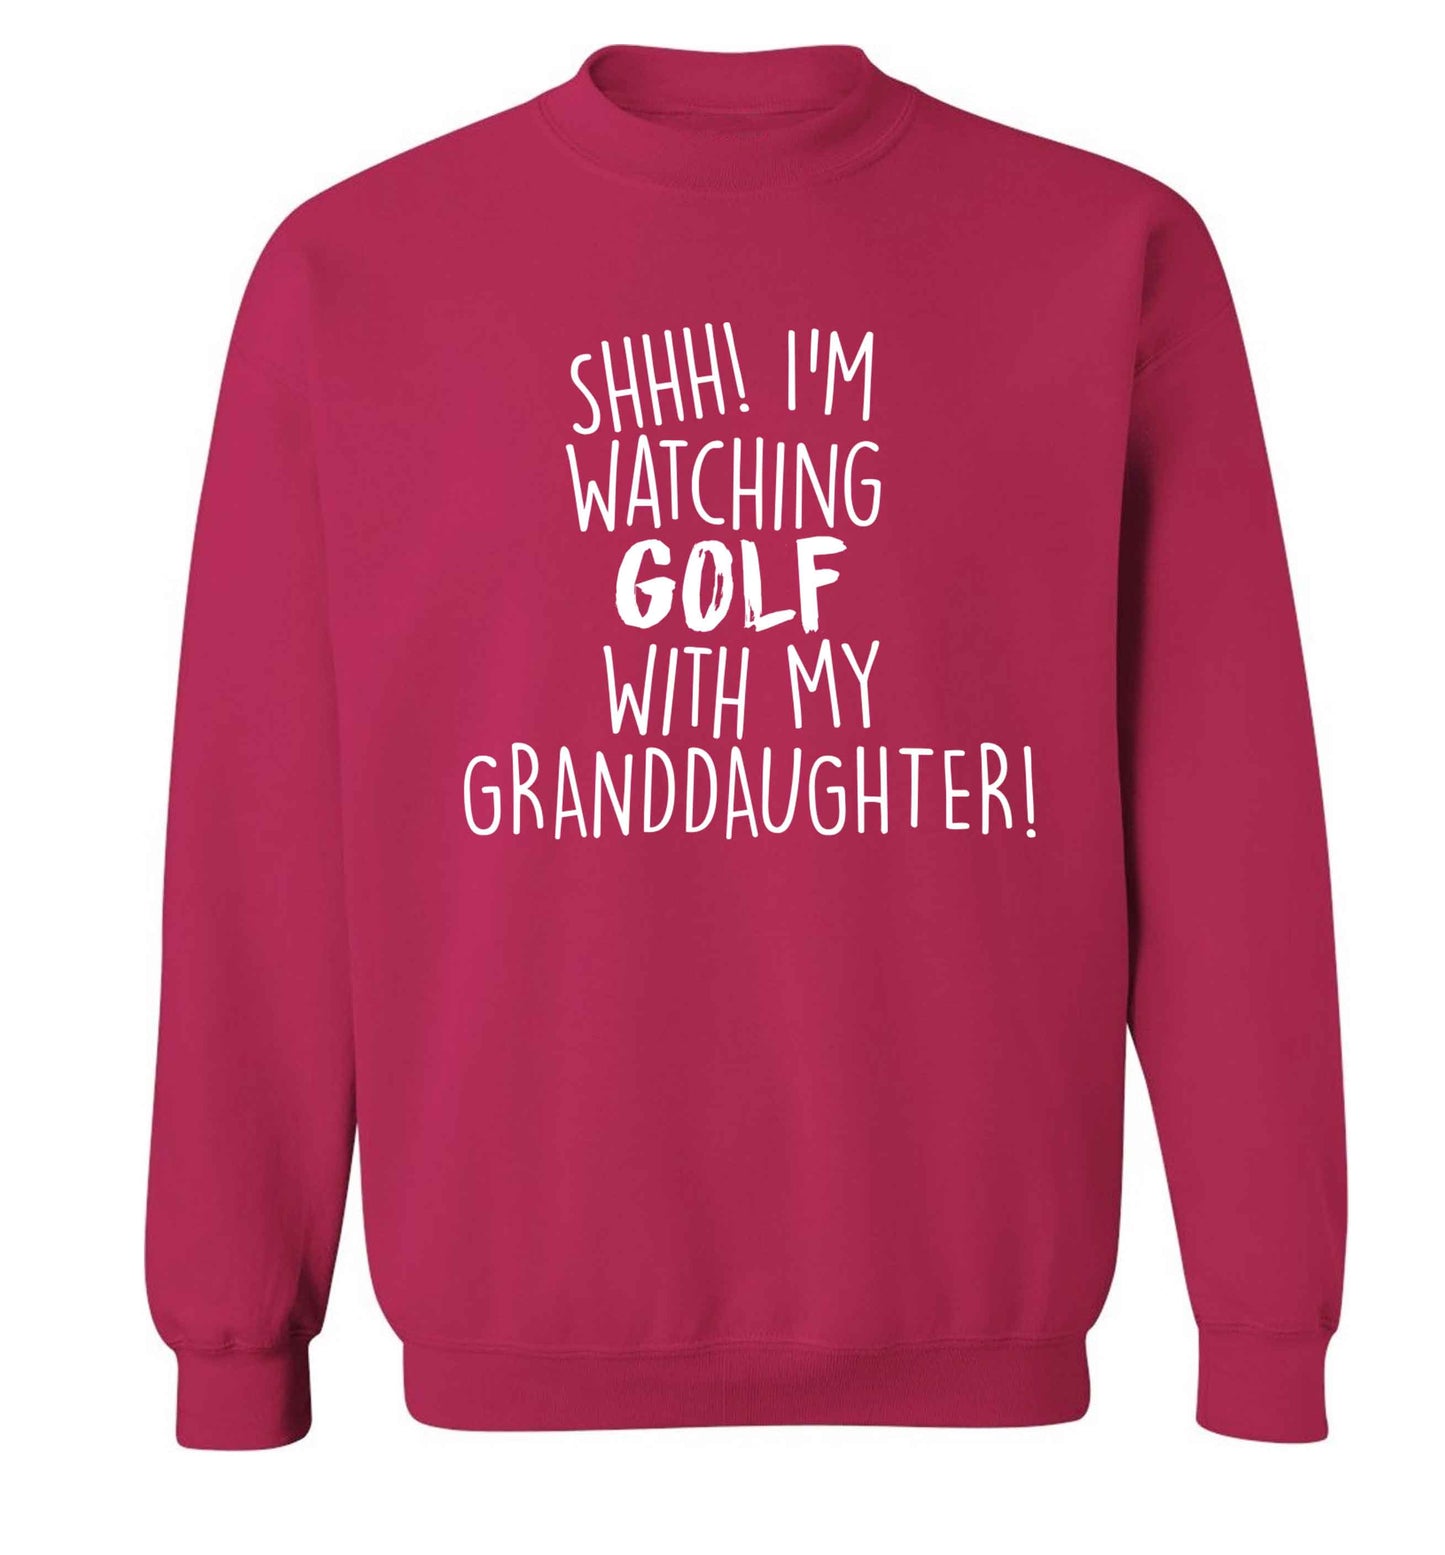 Shh I'm watching golf with my granddaughter Adult's unisex pink Sweater 2XL